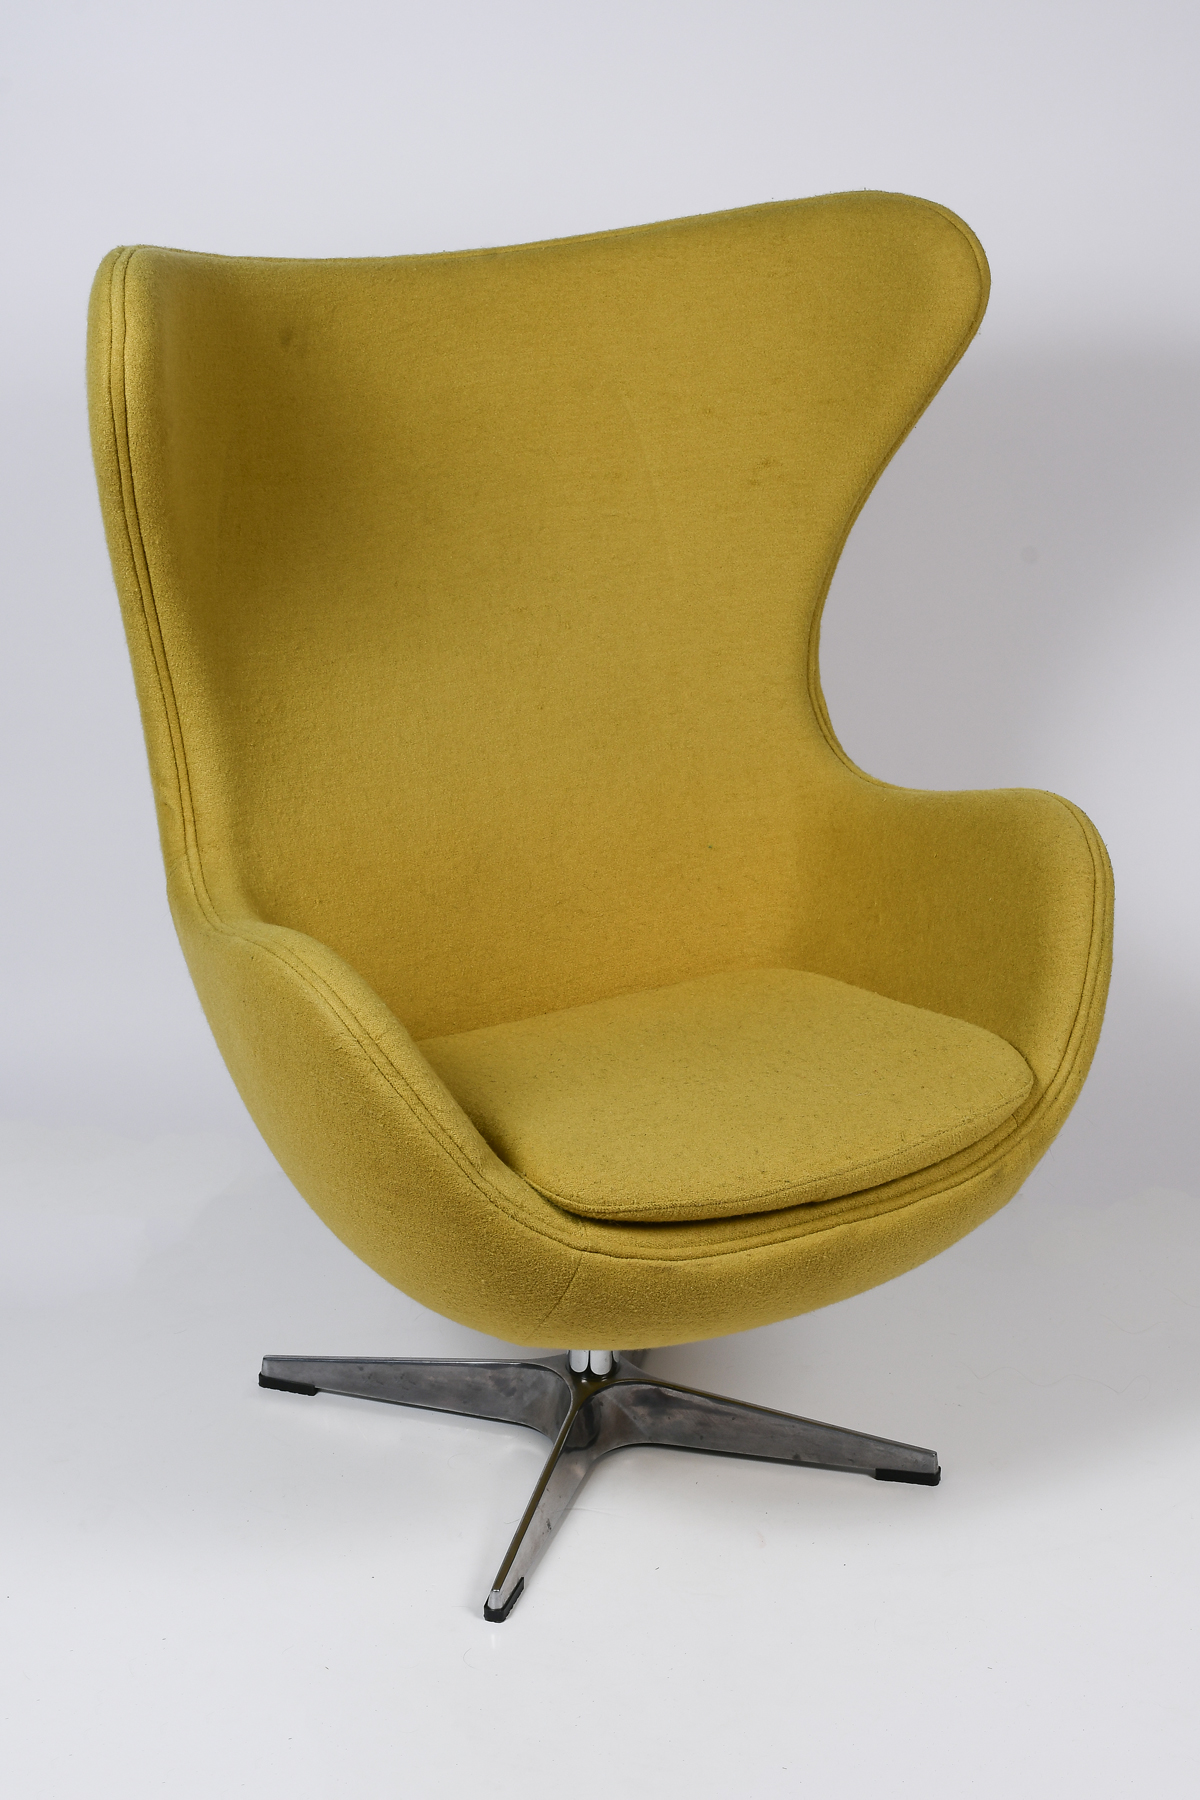 SWIVEL EGG CHAIR IN THE STYLE OF